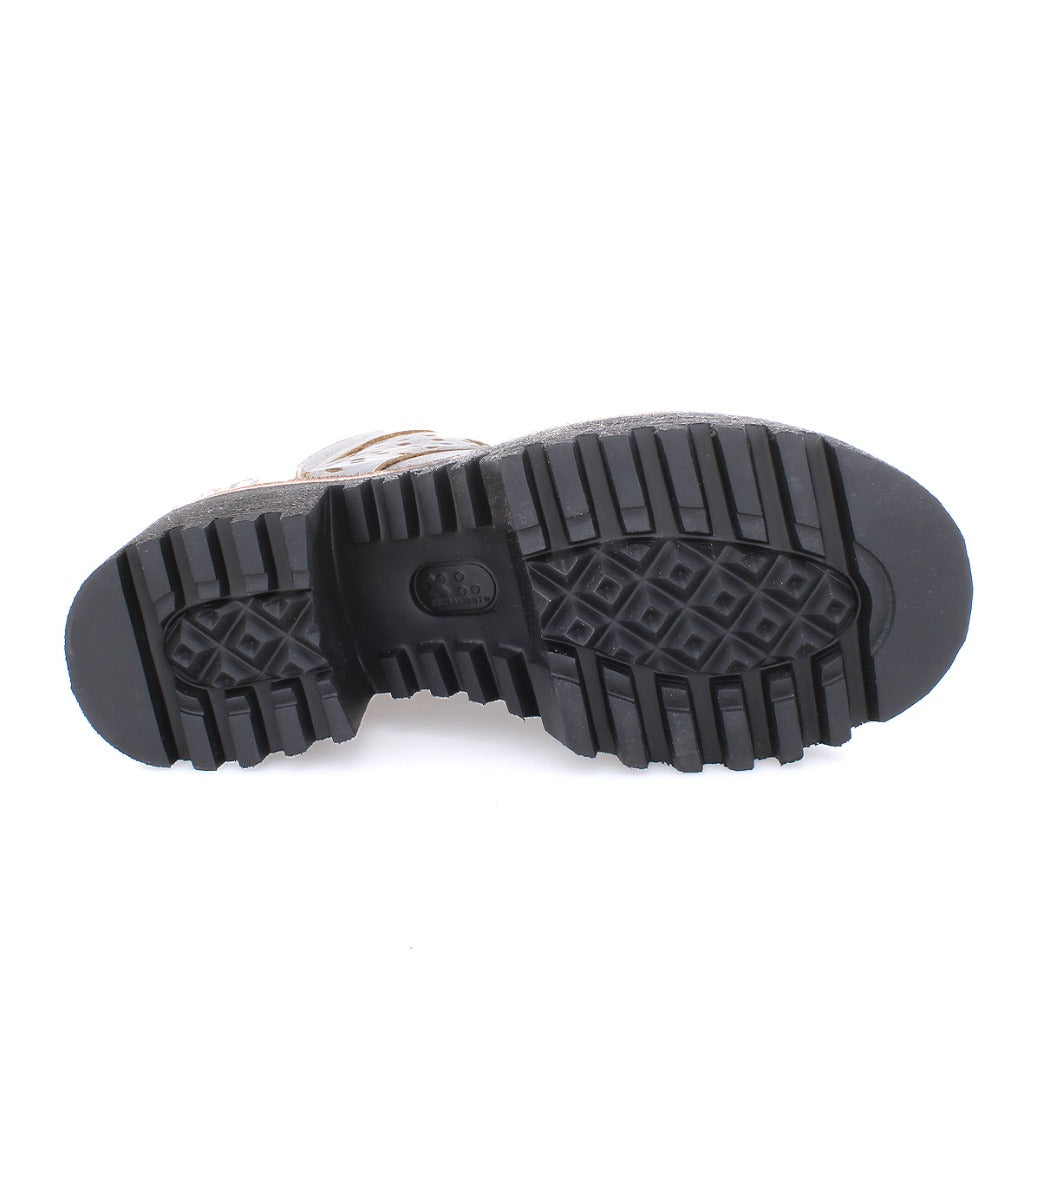 A pair of Bed Stu Tanzania men's shoes with black soles on a white background.